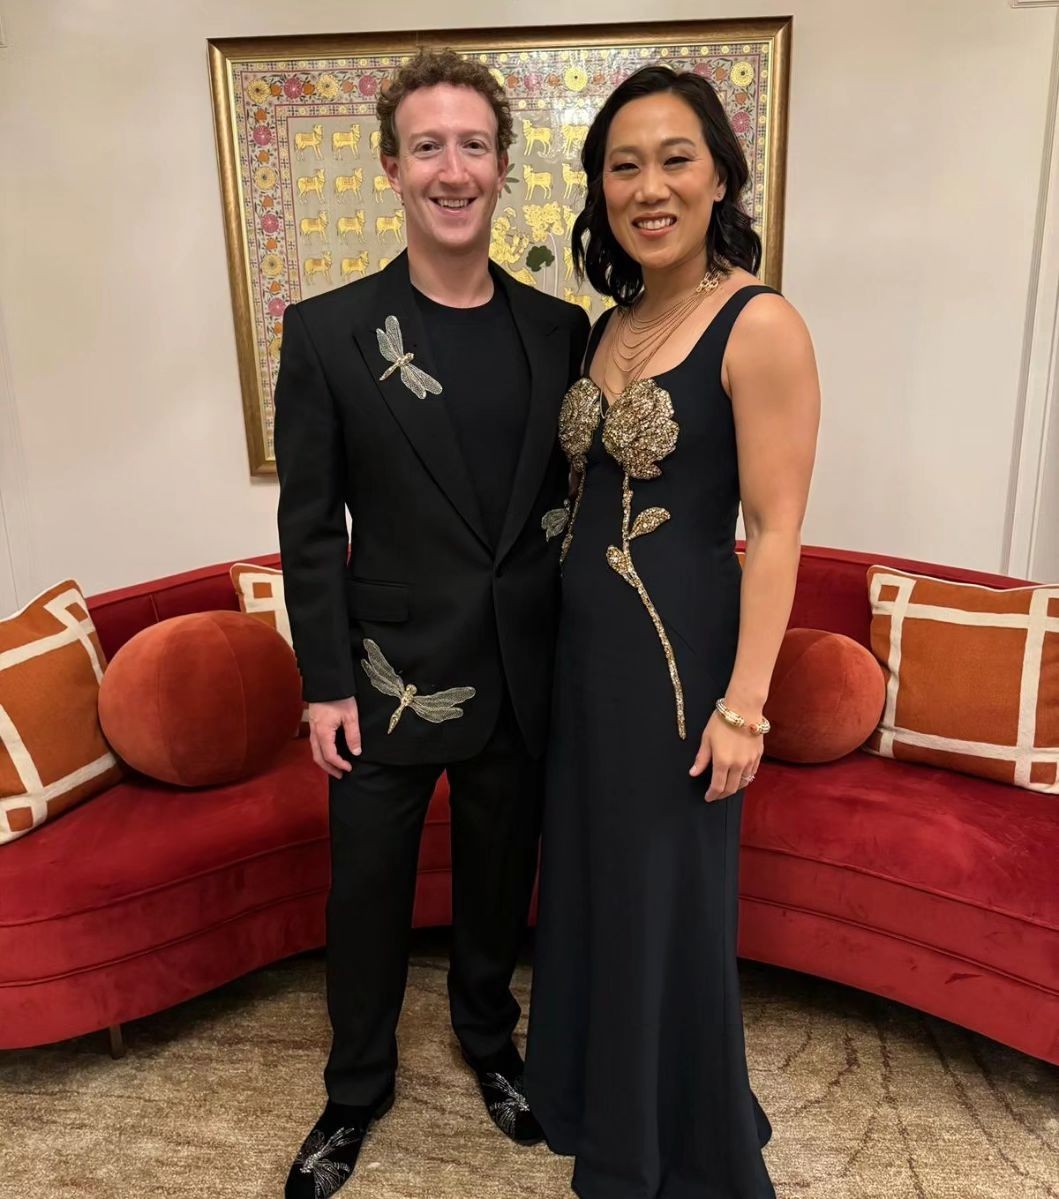 Facebook boss Mark Zuckerberg and his wife attract attention at a $120 million wedding party - Photo 1.